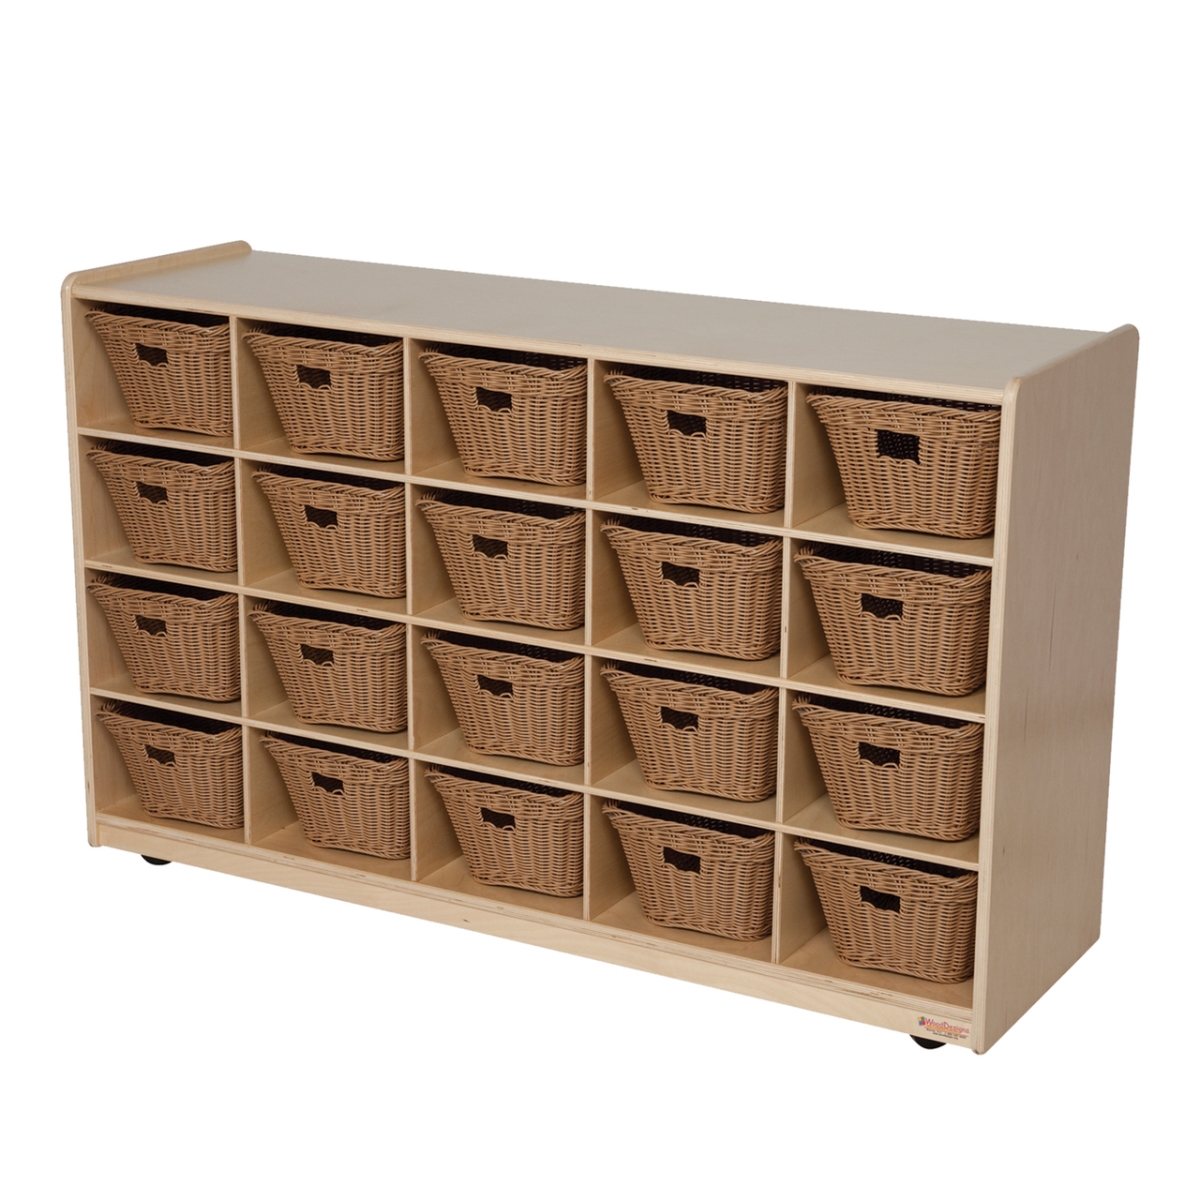 14589-718 Tip-me-not 20 Tray Storage With Baskets